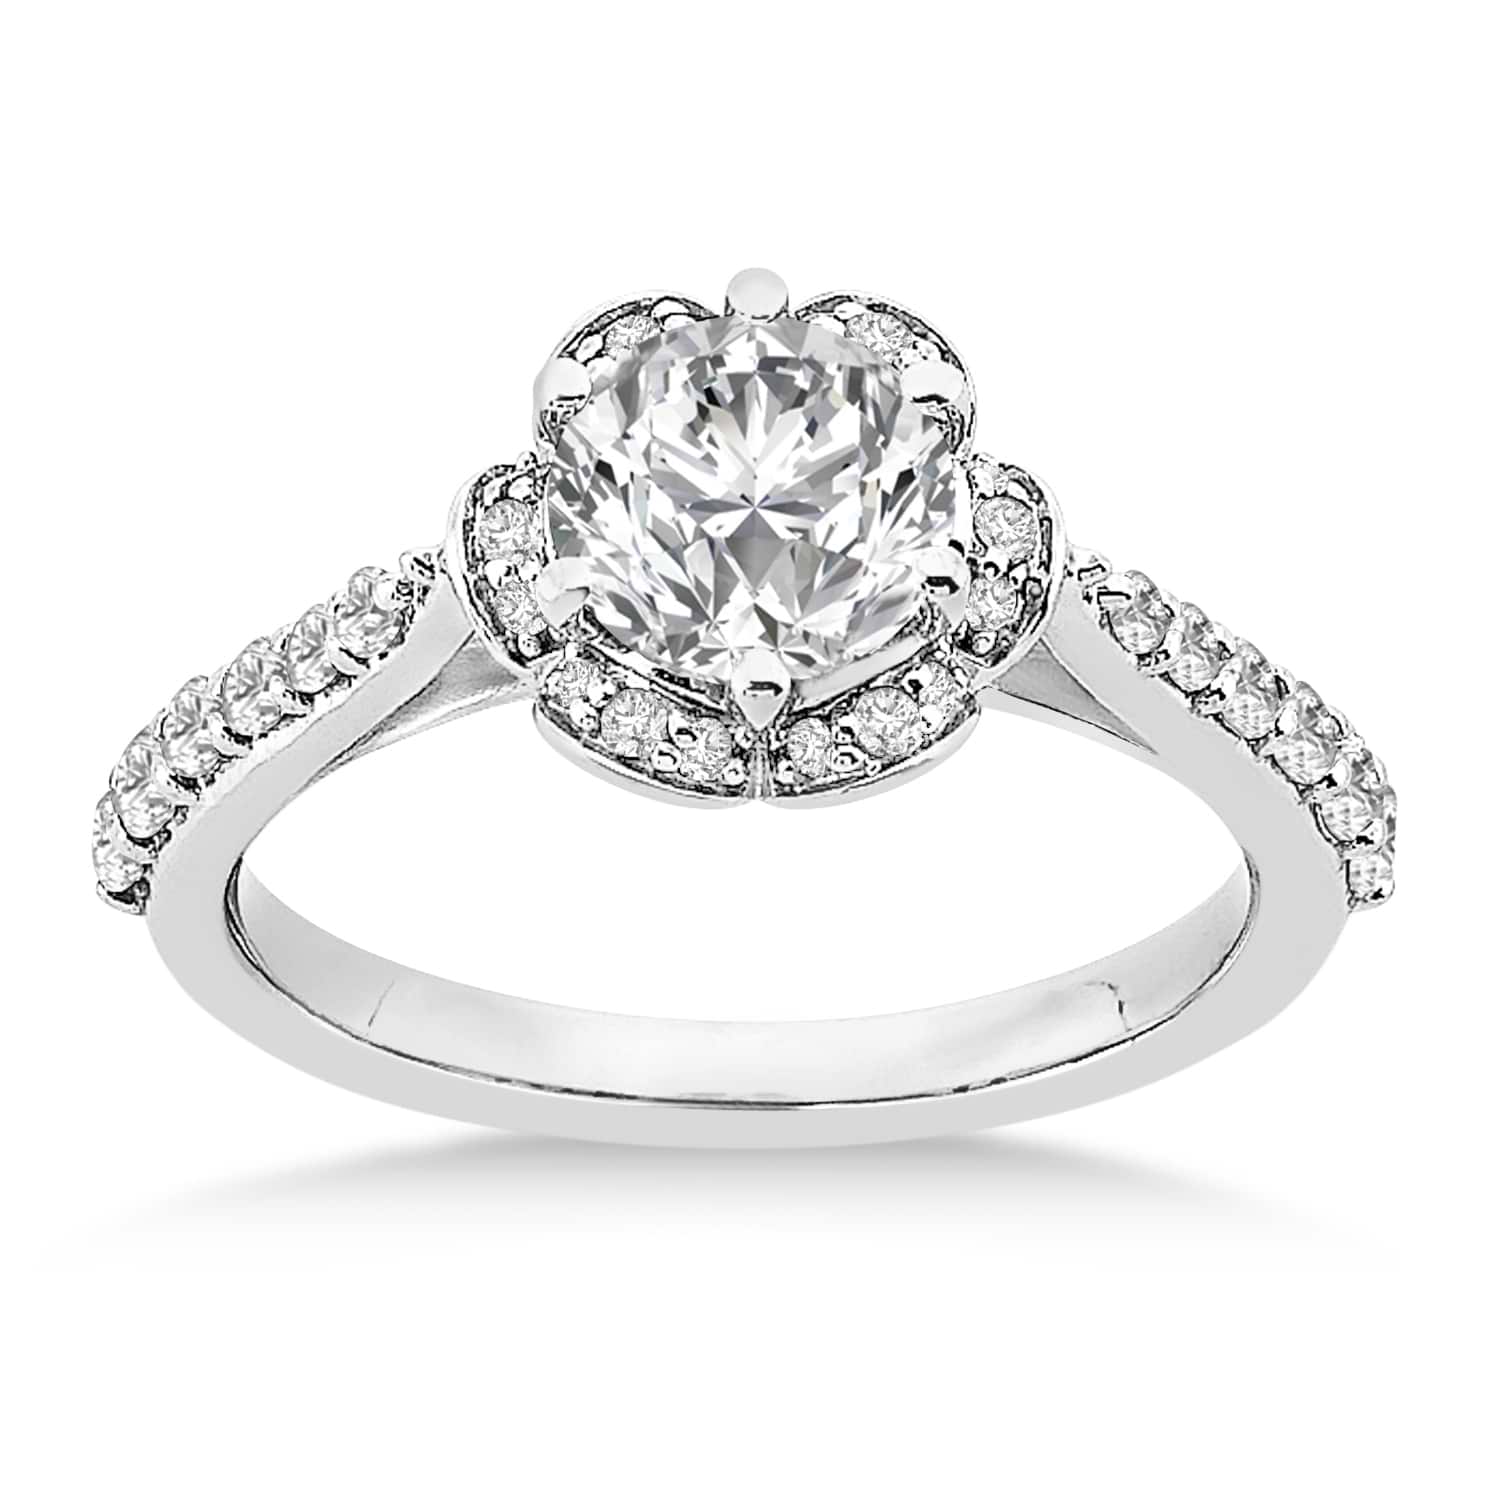 Diamond Accented Floral Halo Engagement Ring Platinum (0.36ct)